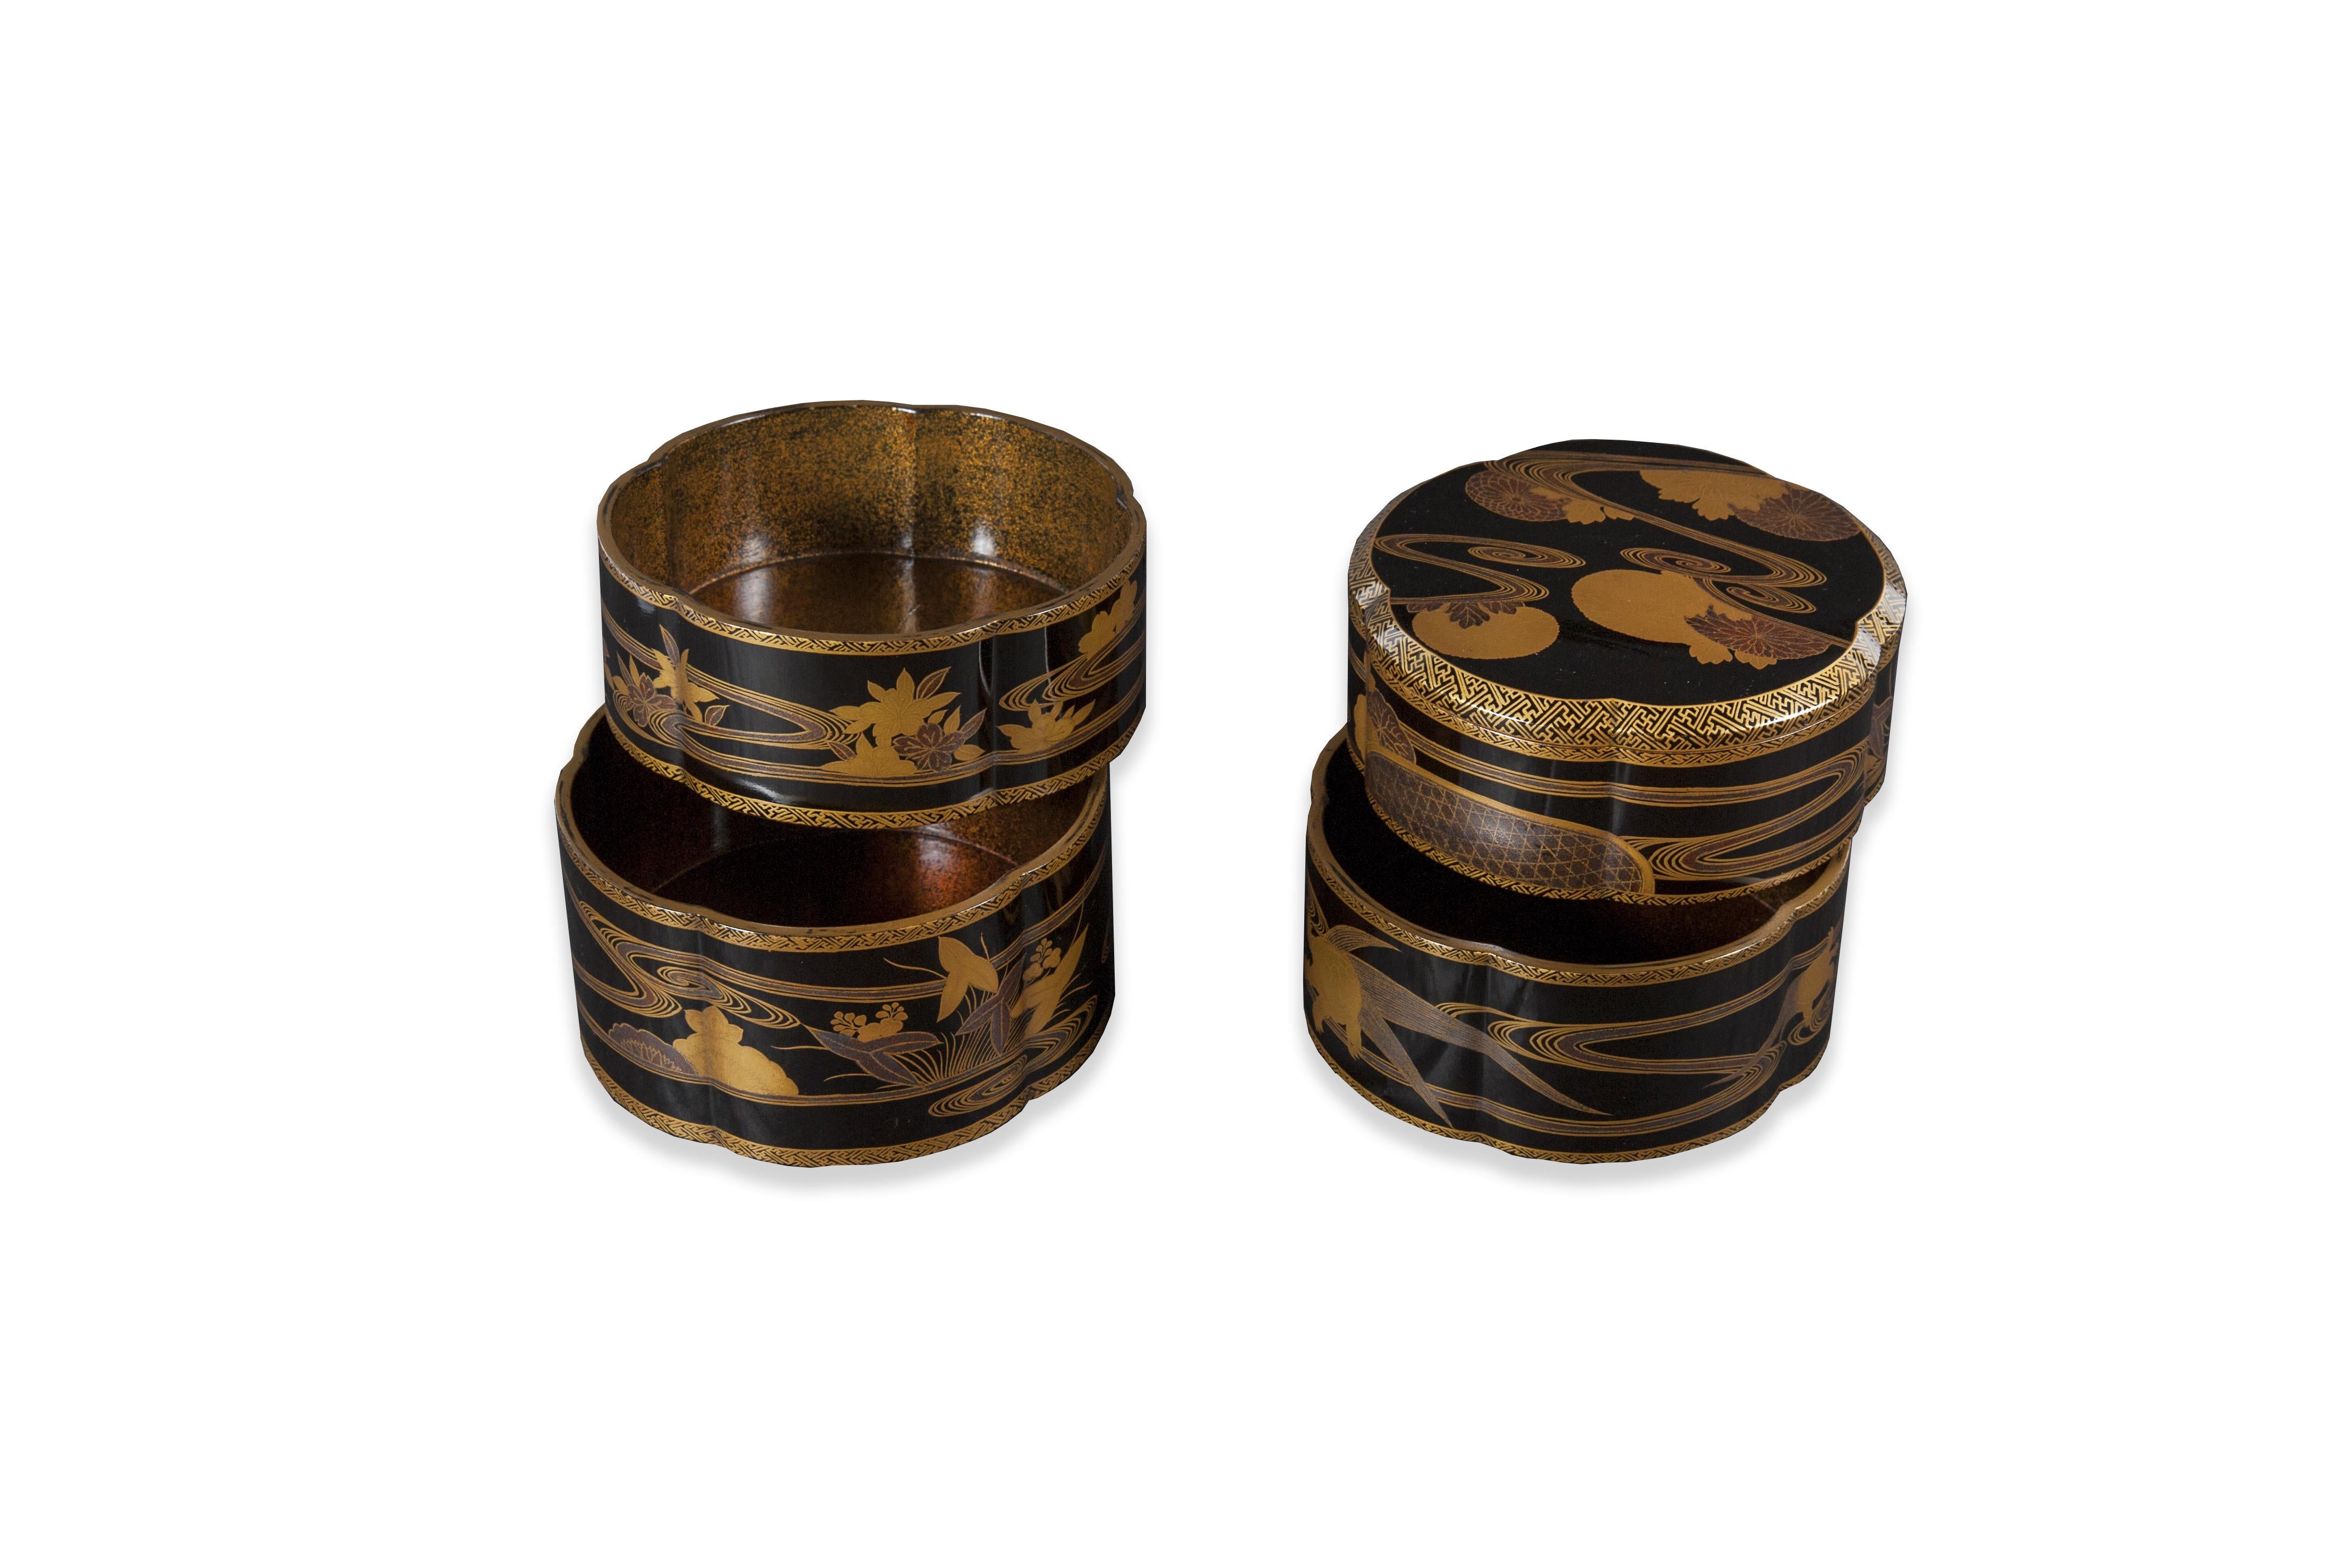 Fine Japanese Black and Gold Lacquer Sageju-Bako - Picnic Box For Sale 2